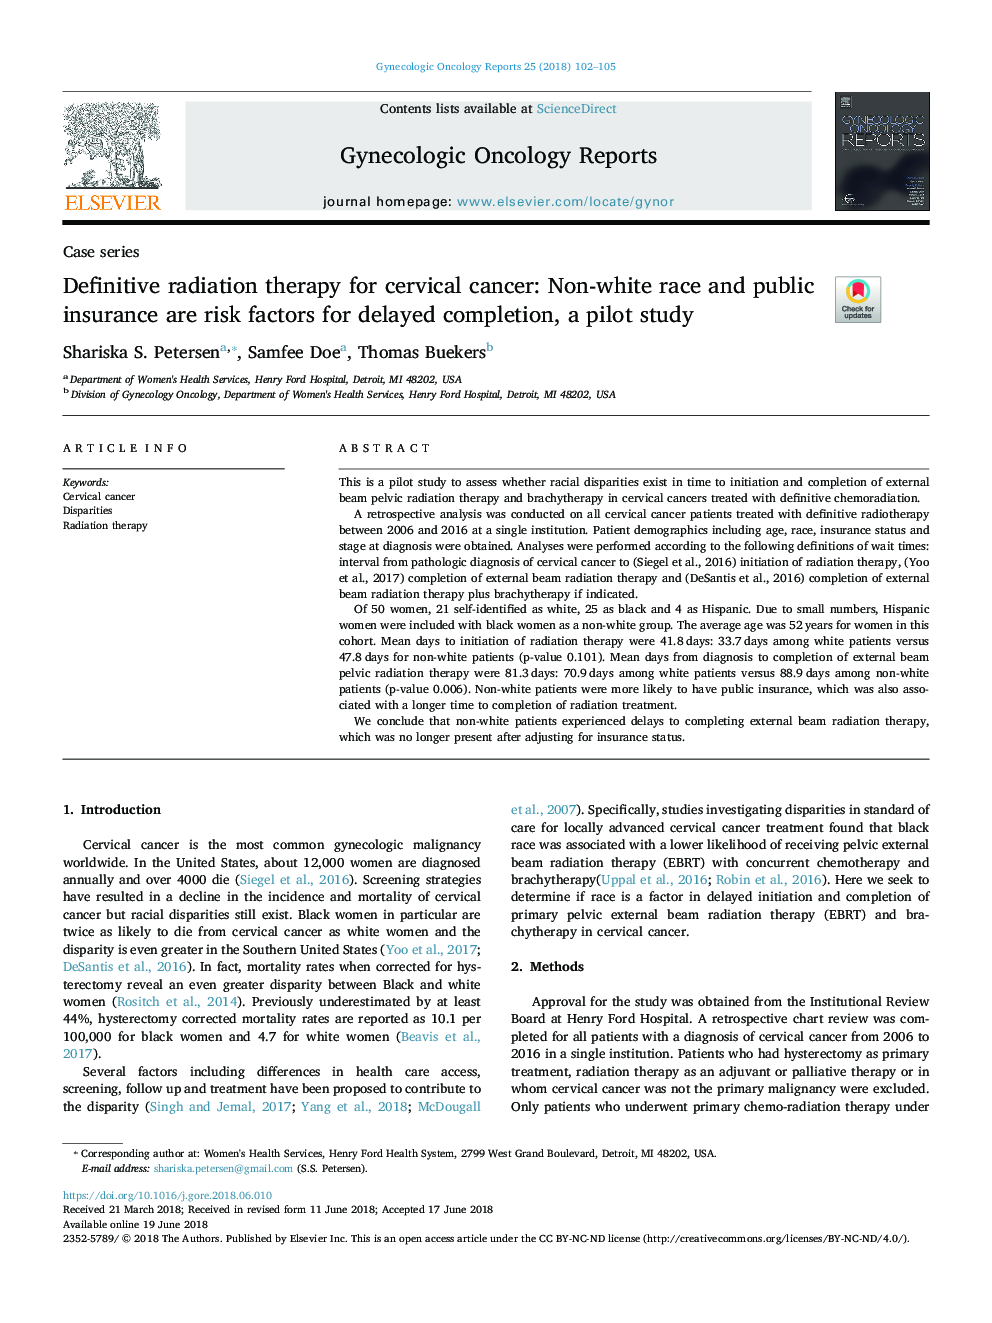 Definitive radiation therapy for cervical cancer: Non-white race and public insurance are risk factors for delayed completion, a pilot study